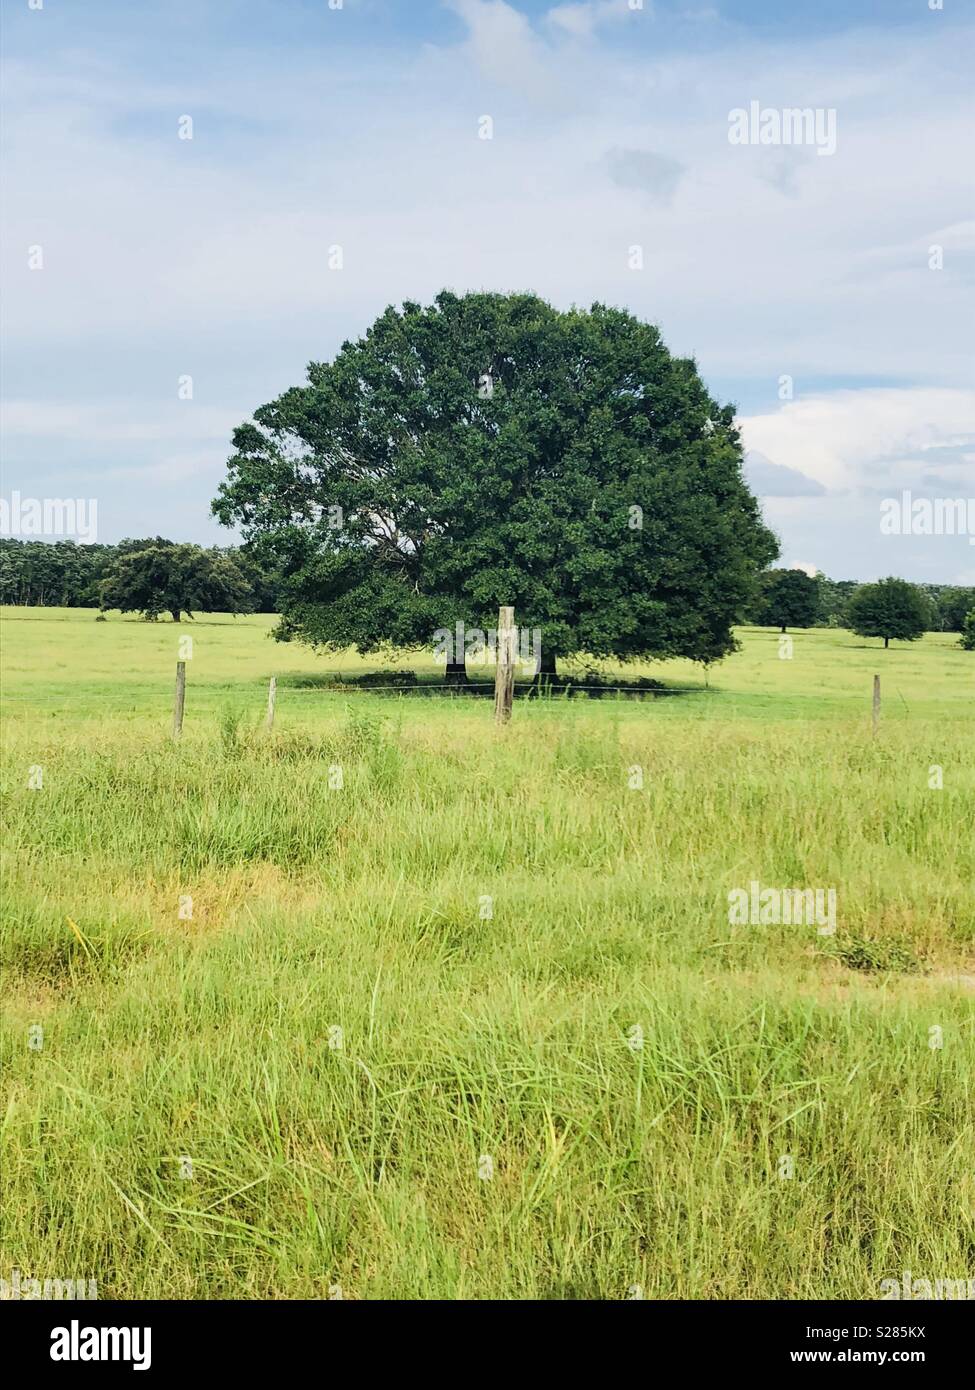 Large shade tree in the middle of a field Stock Photo